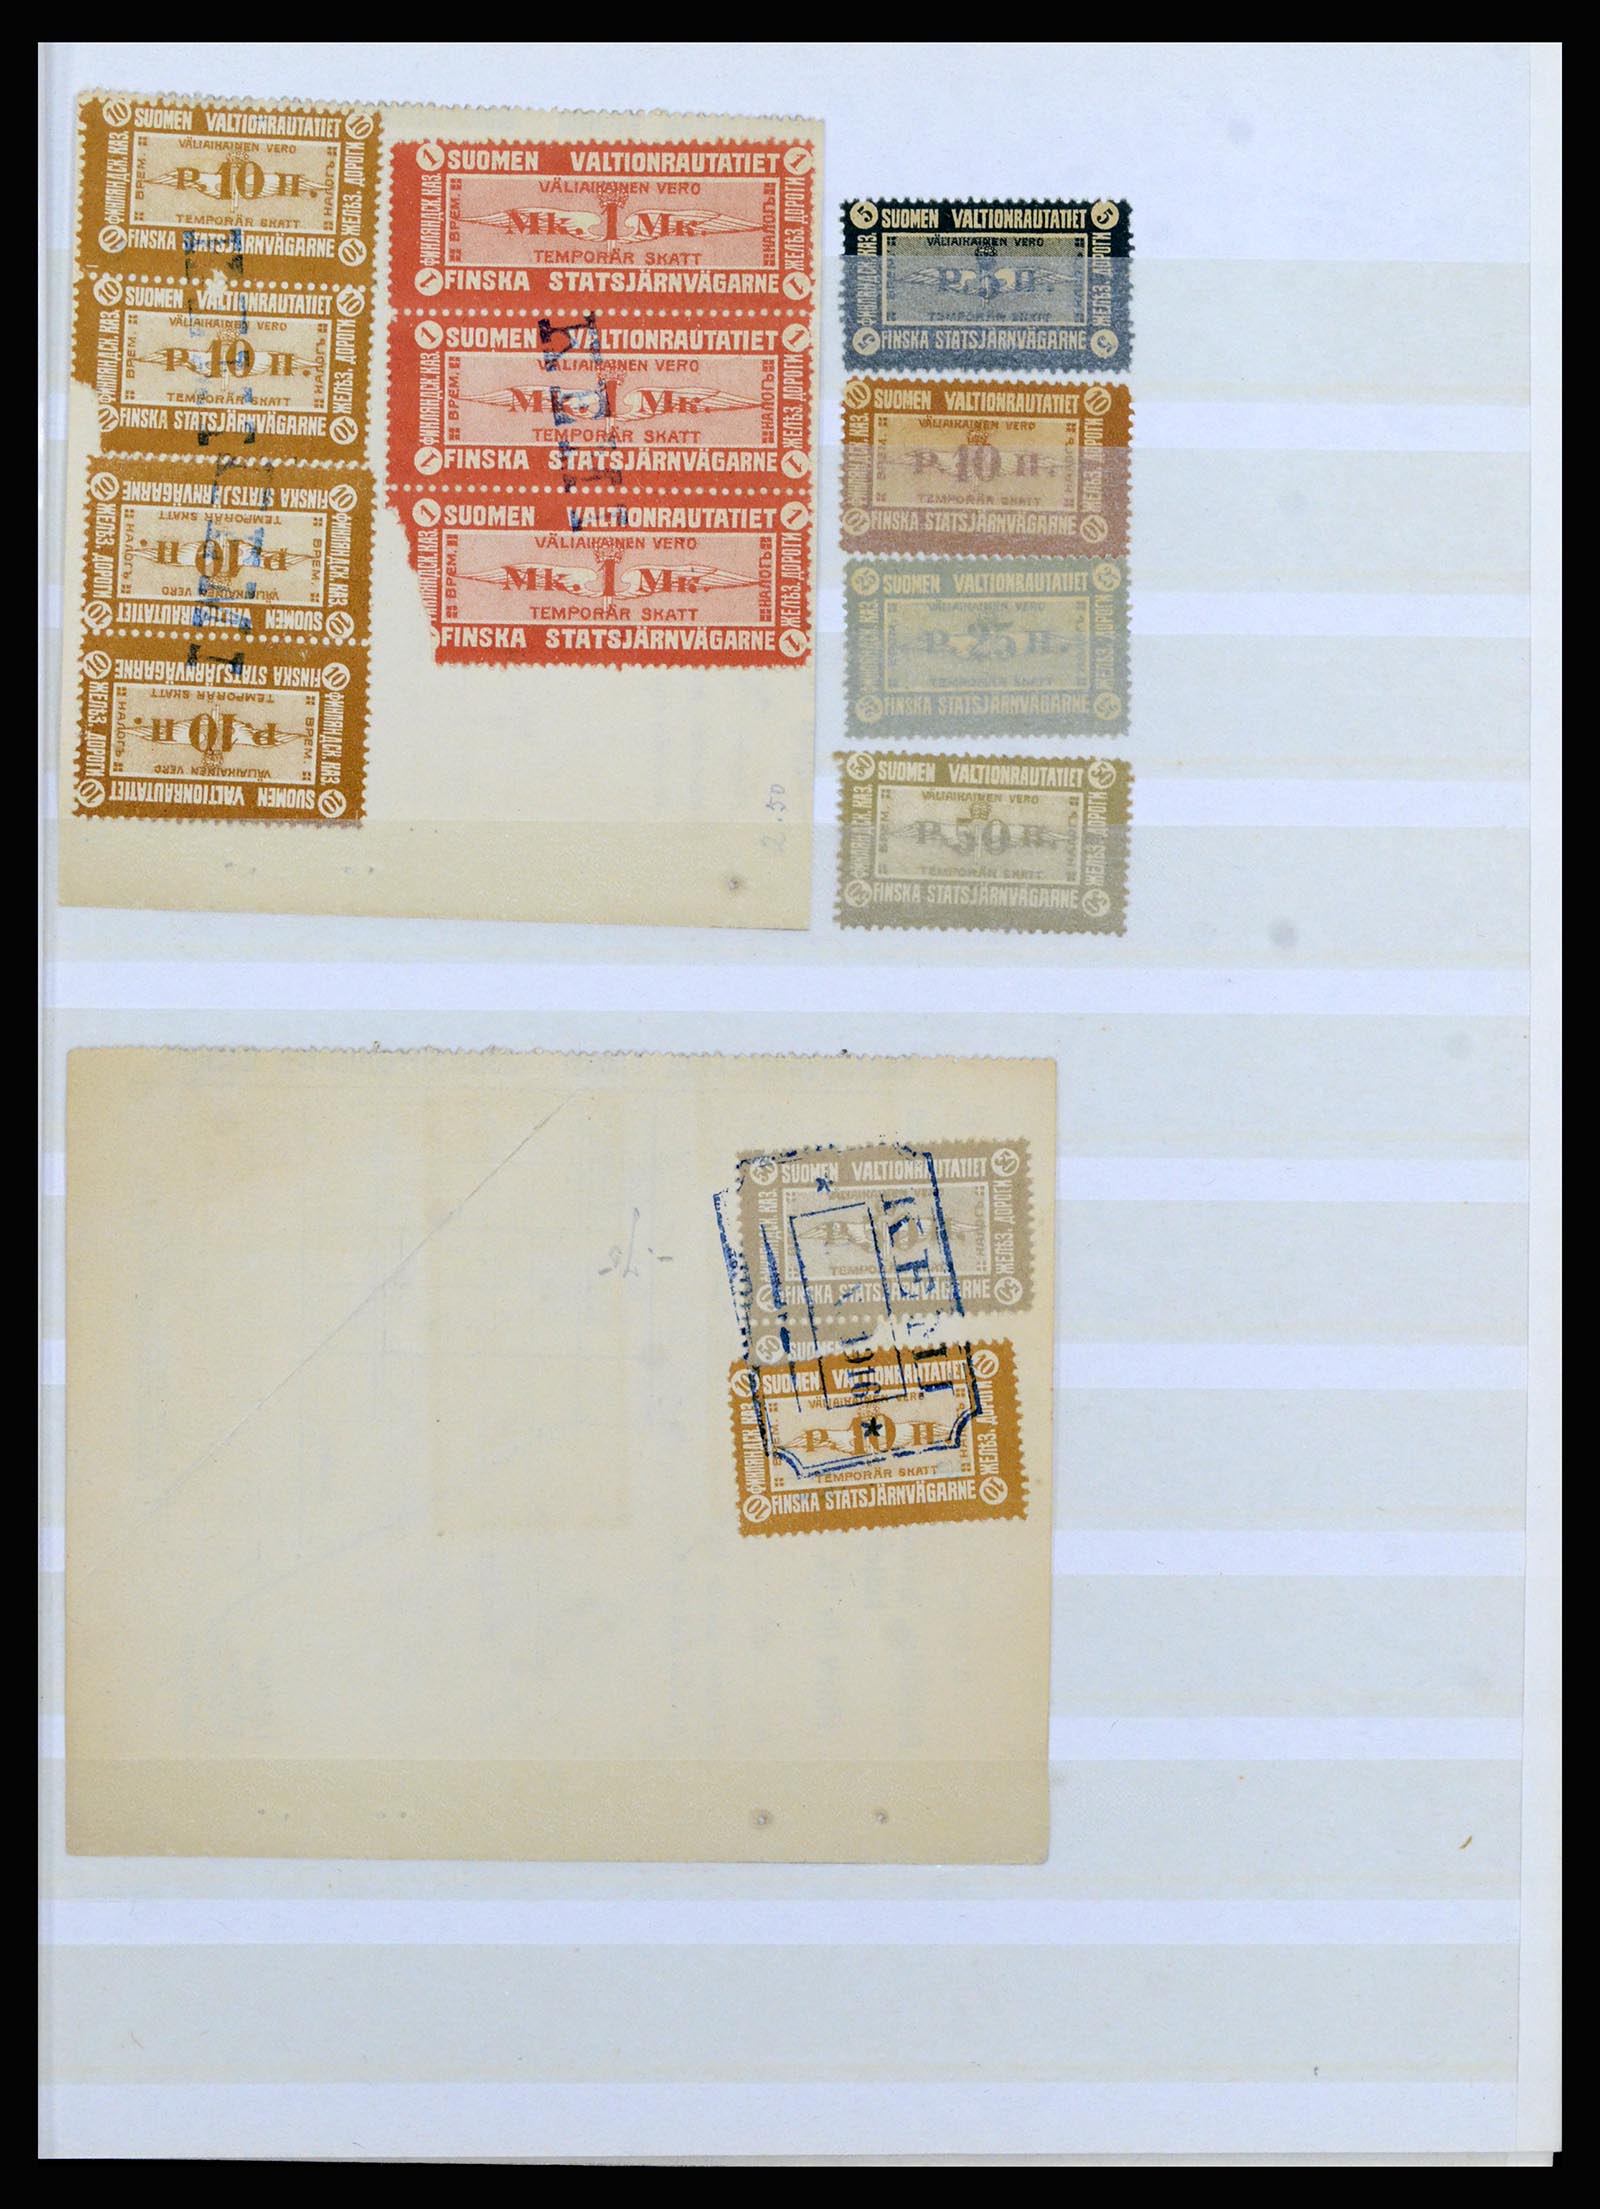 36981 032 - Stamp collection 36981 Scandinavia railroadstamps.